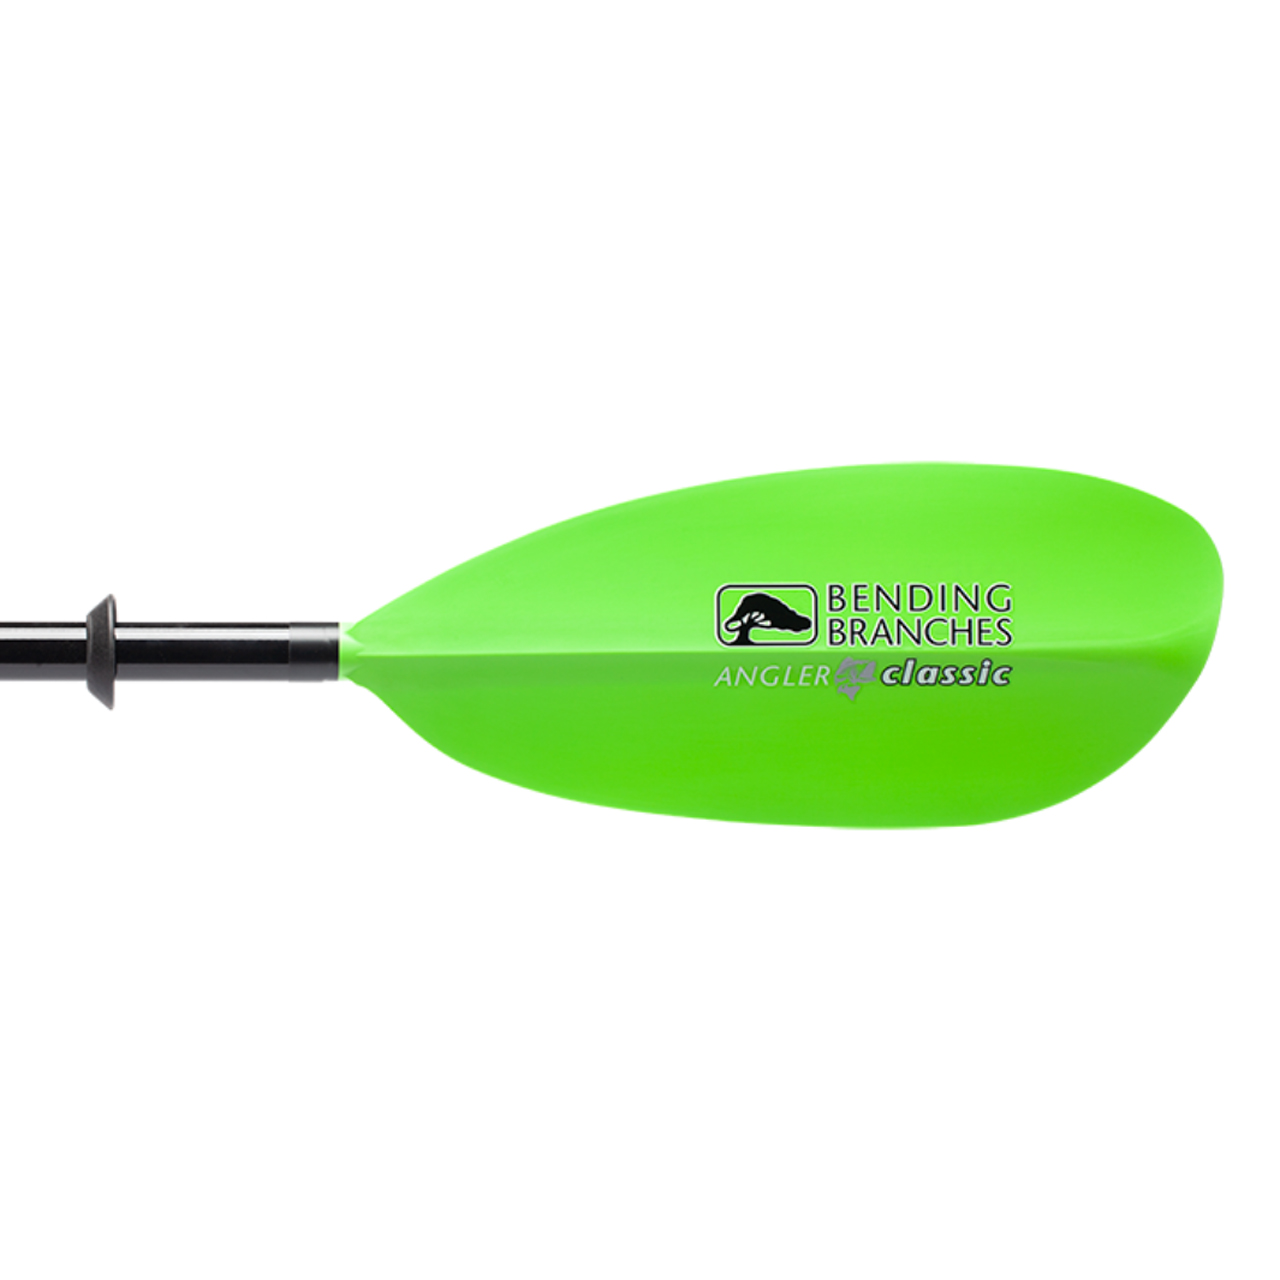 Bending Branches Angler Classic Paddle, Electric Green - 250-265cm - Versa-Lok